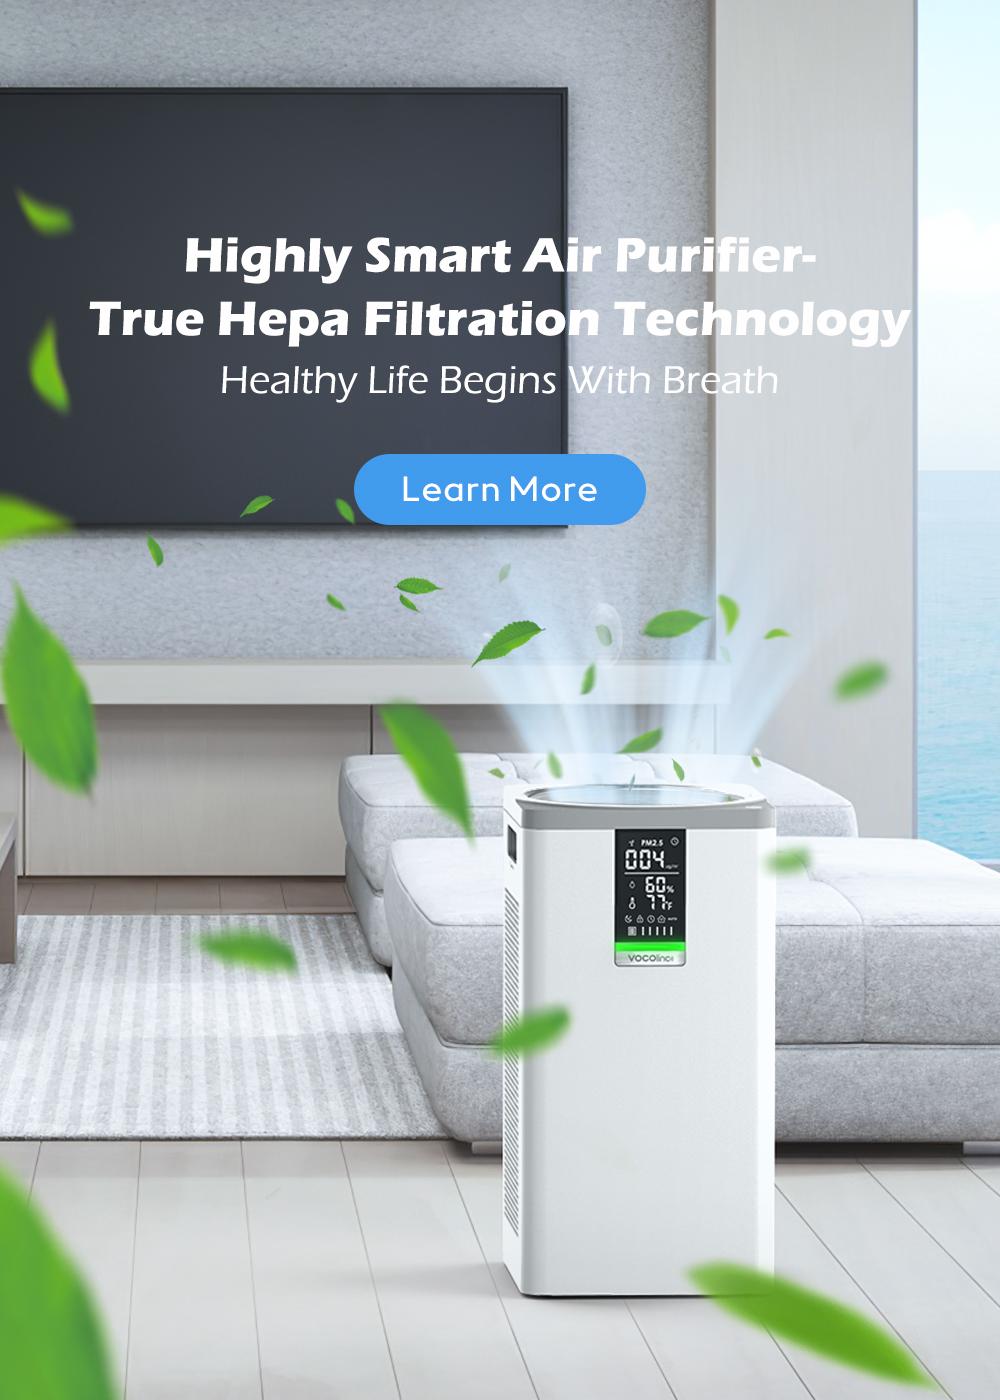 VOCOlinc Smart Air Purifier.Pre-filter, advanced HEPA filter, and hive pattern activated carbon filter can effectively block the spread of pet hair, dust, smoke, PM2.5, odor, formaldehyde, bacteria, fungi, and other substances, and give you more pure air.